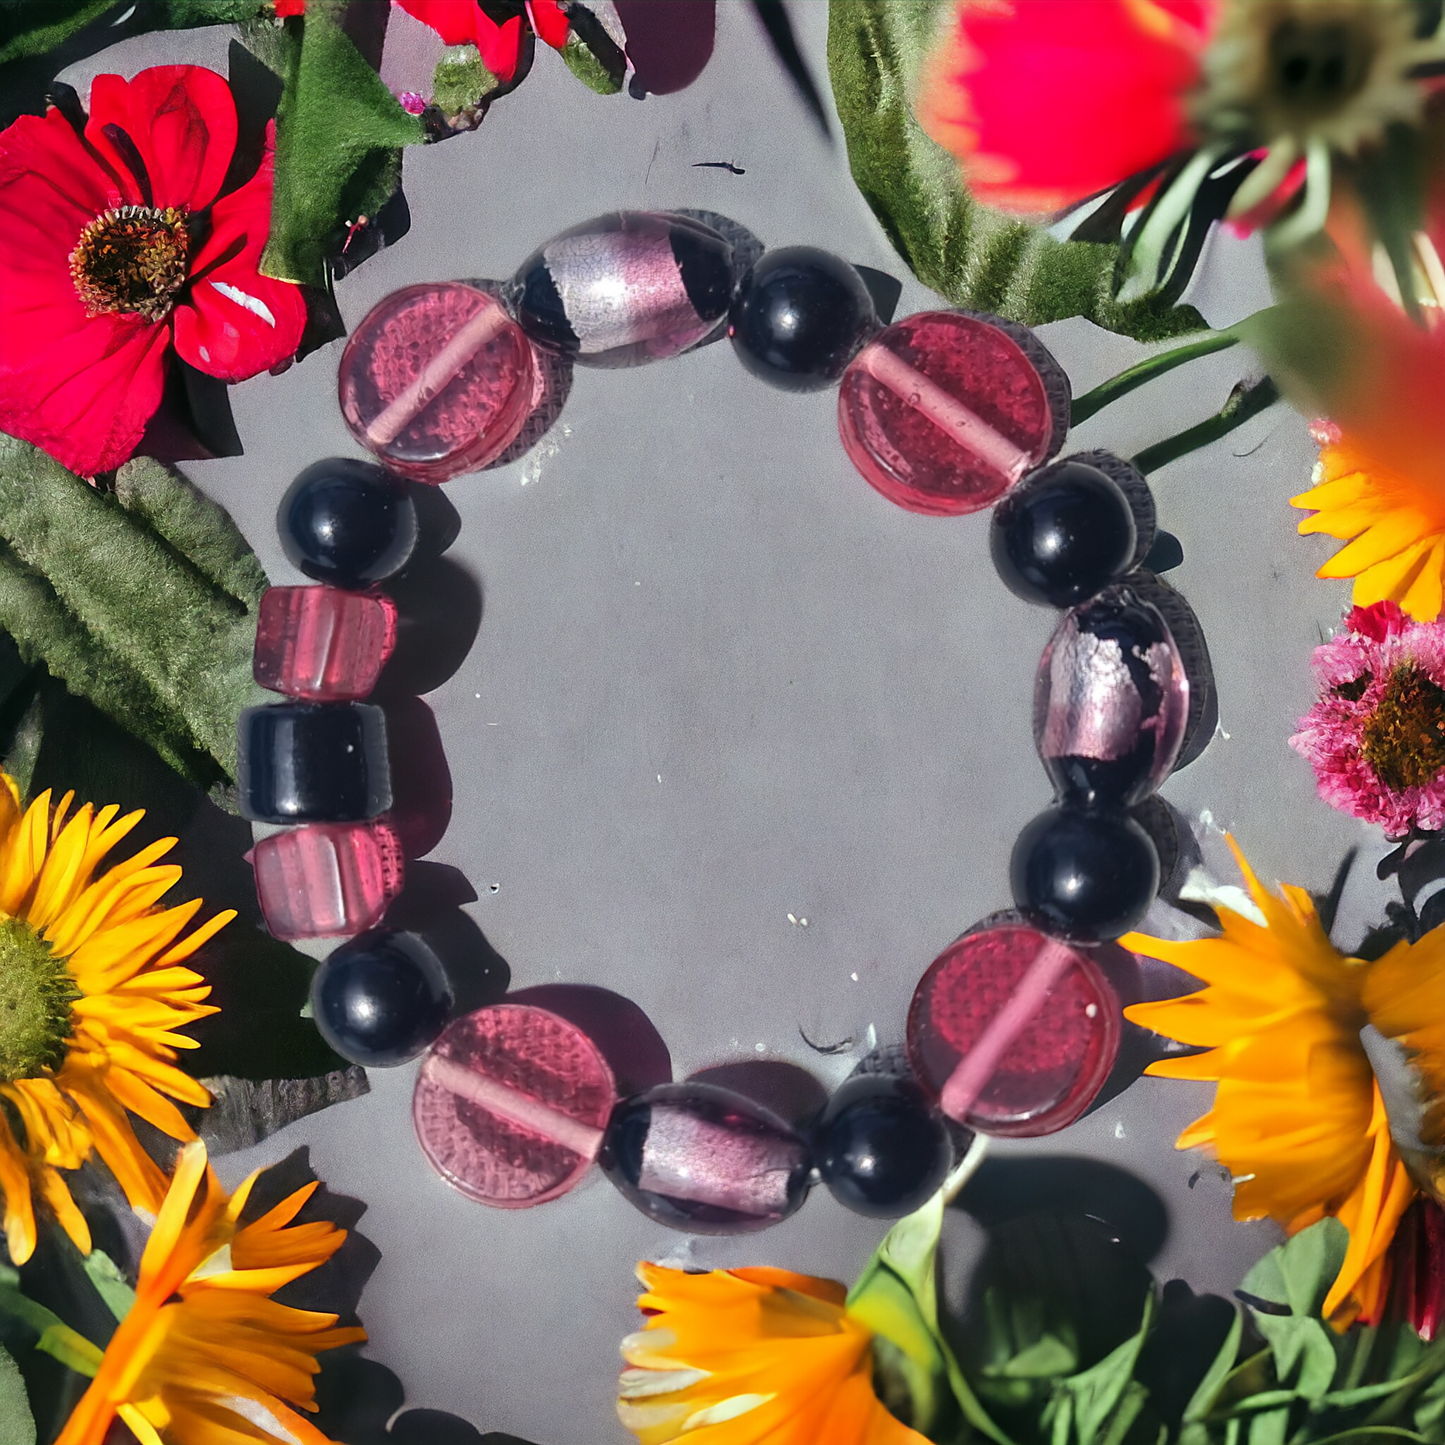 Black Onyx with a raspberry touch